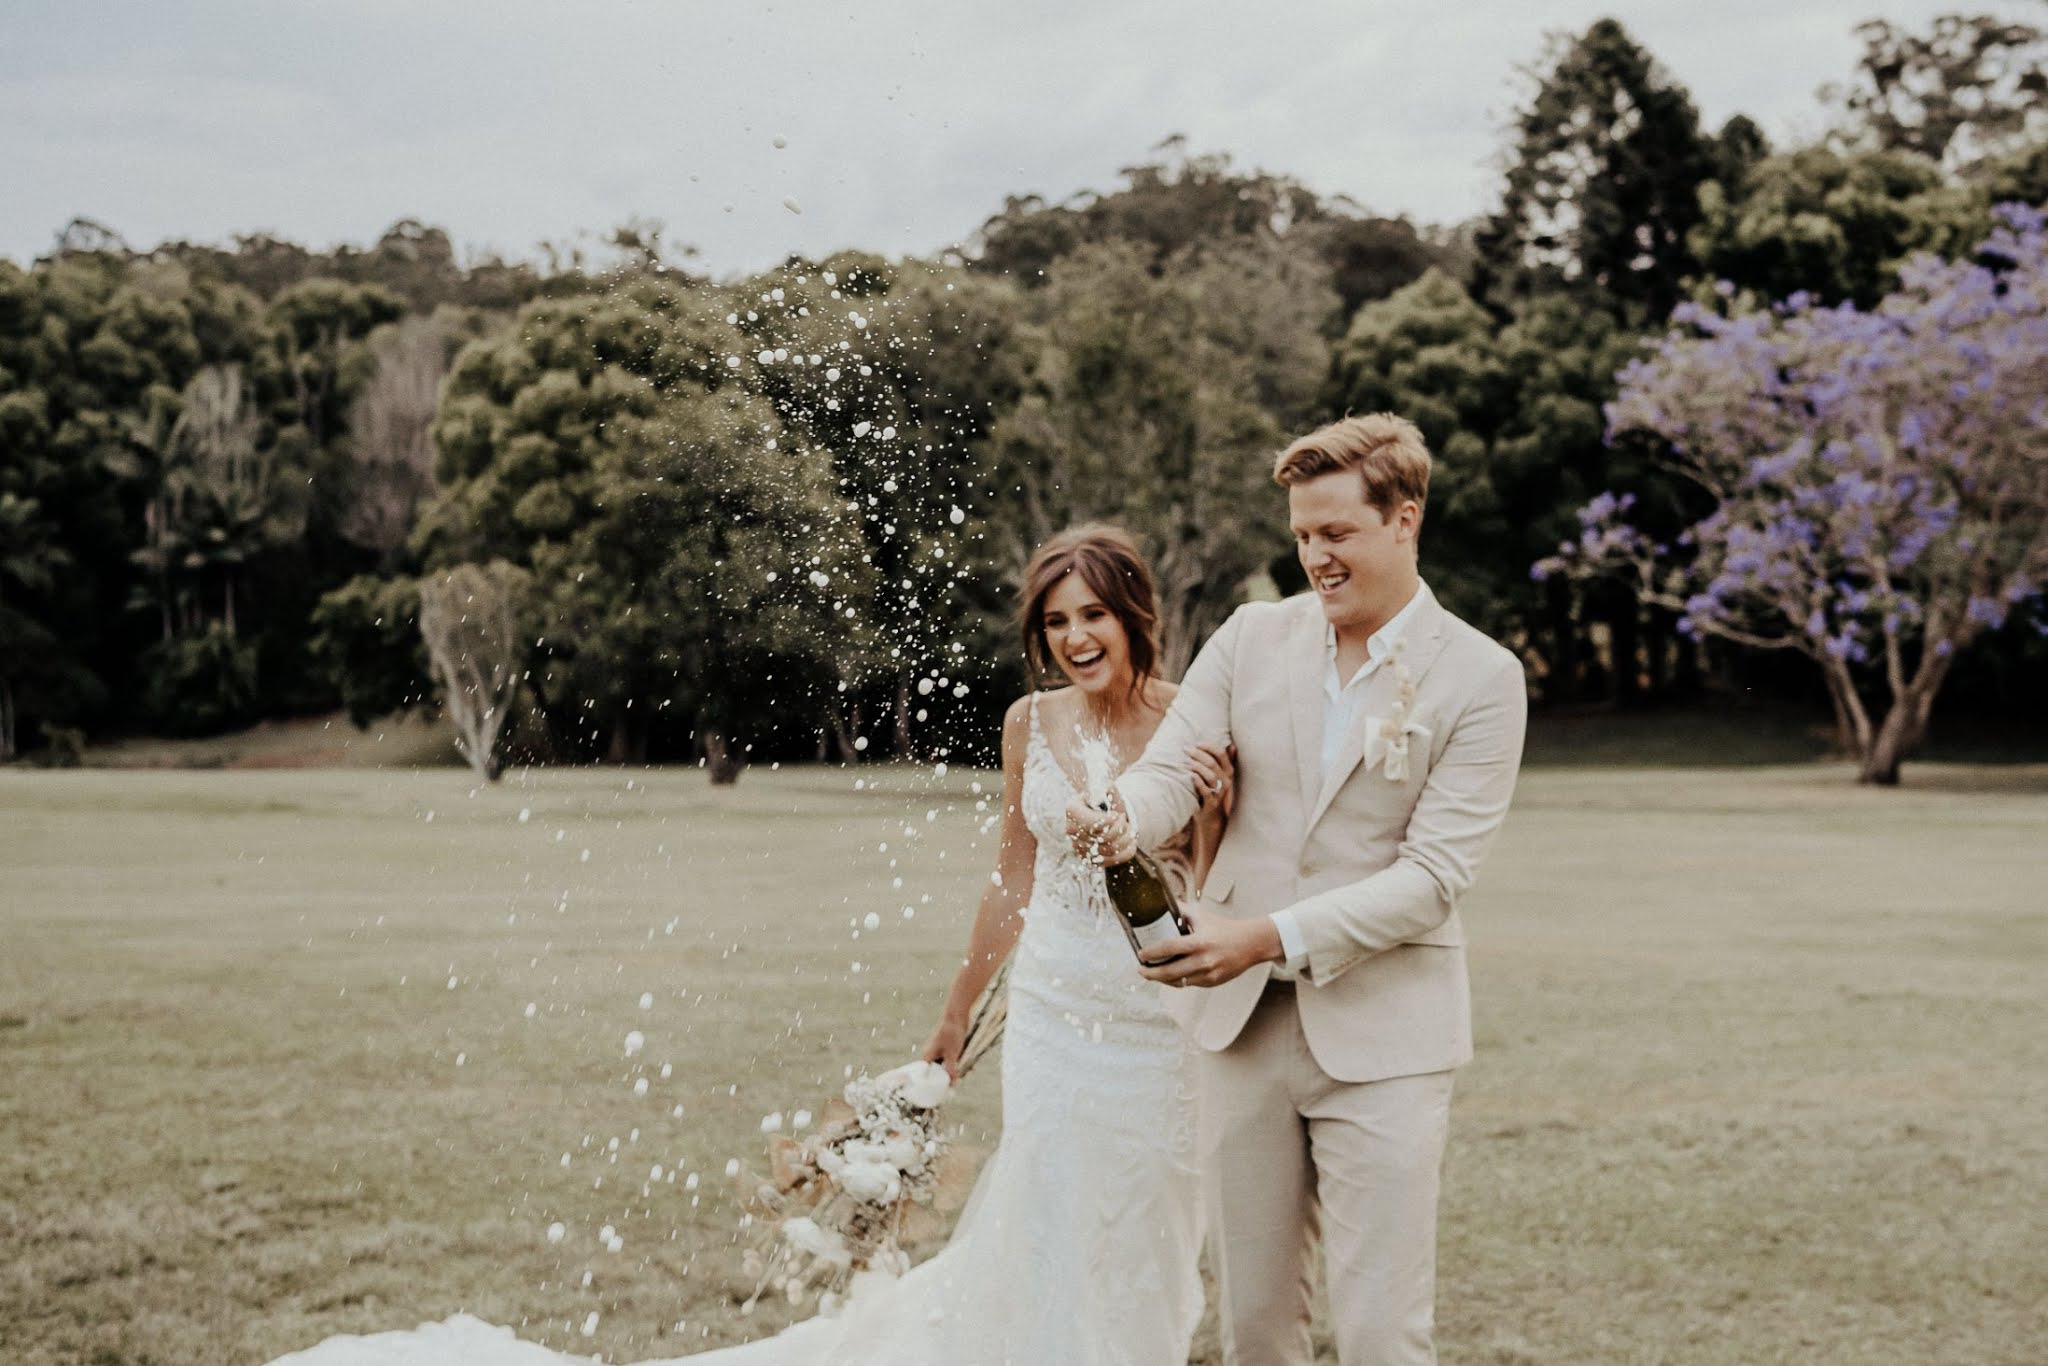 doe and deer photography gold coast bohemian styled weddings venue stationery florals